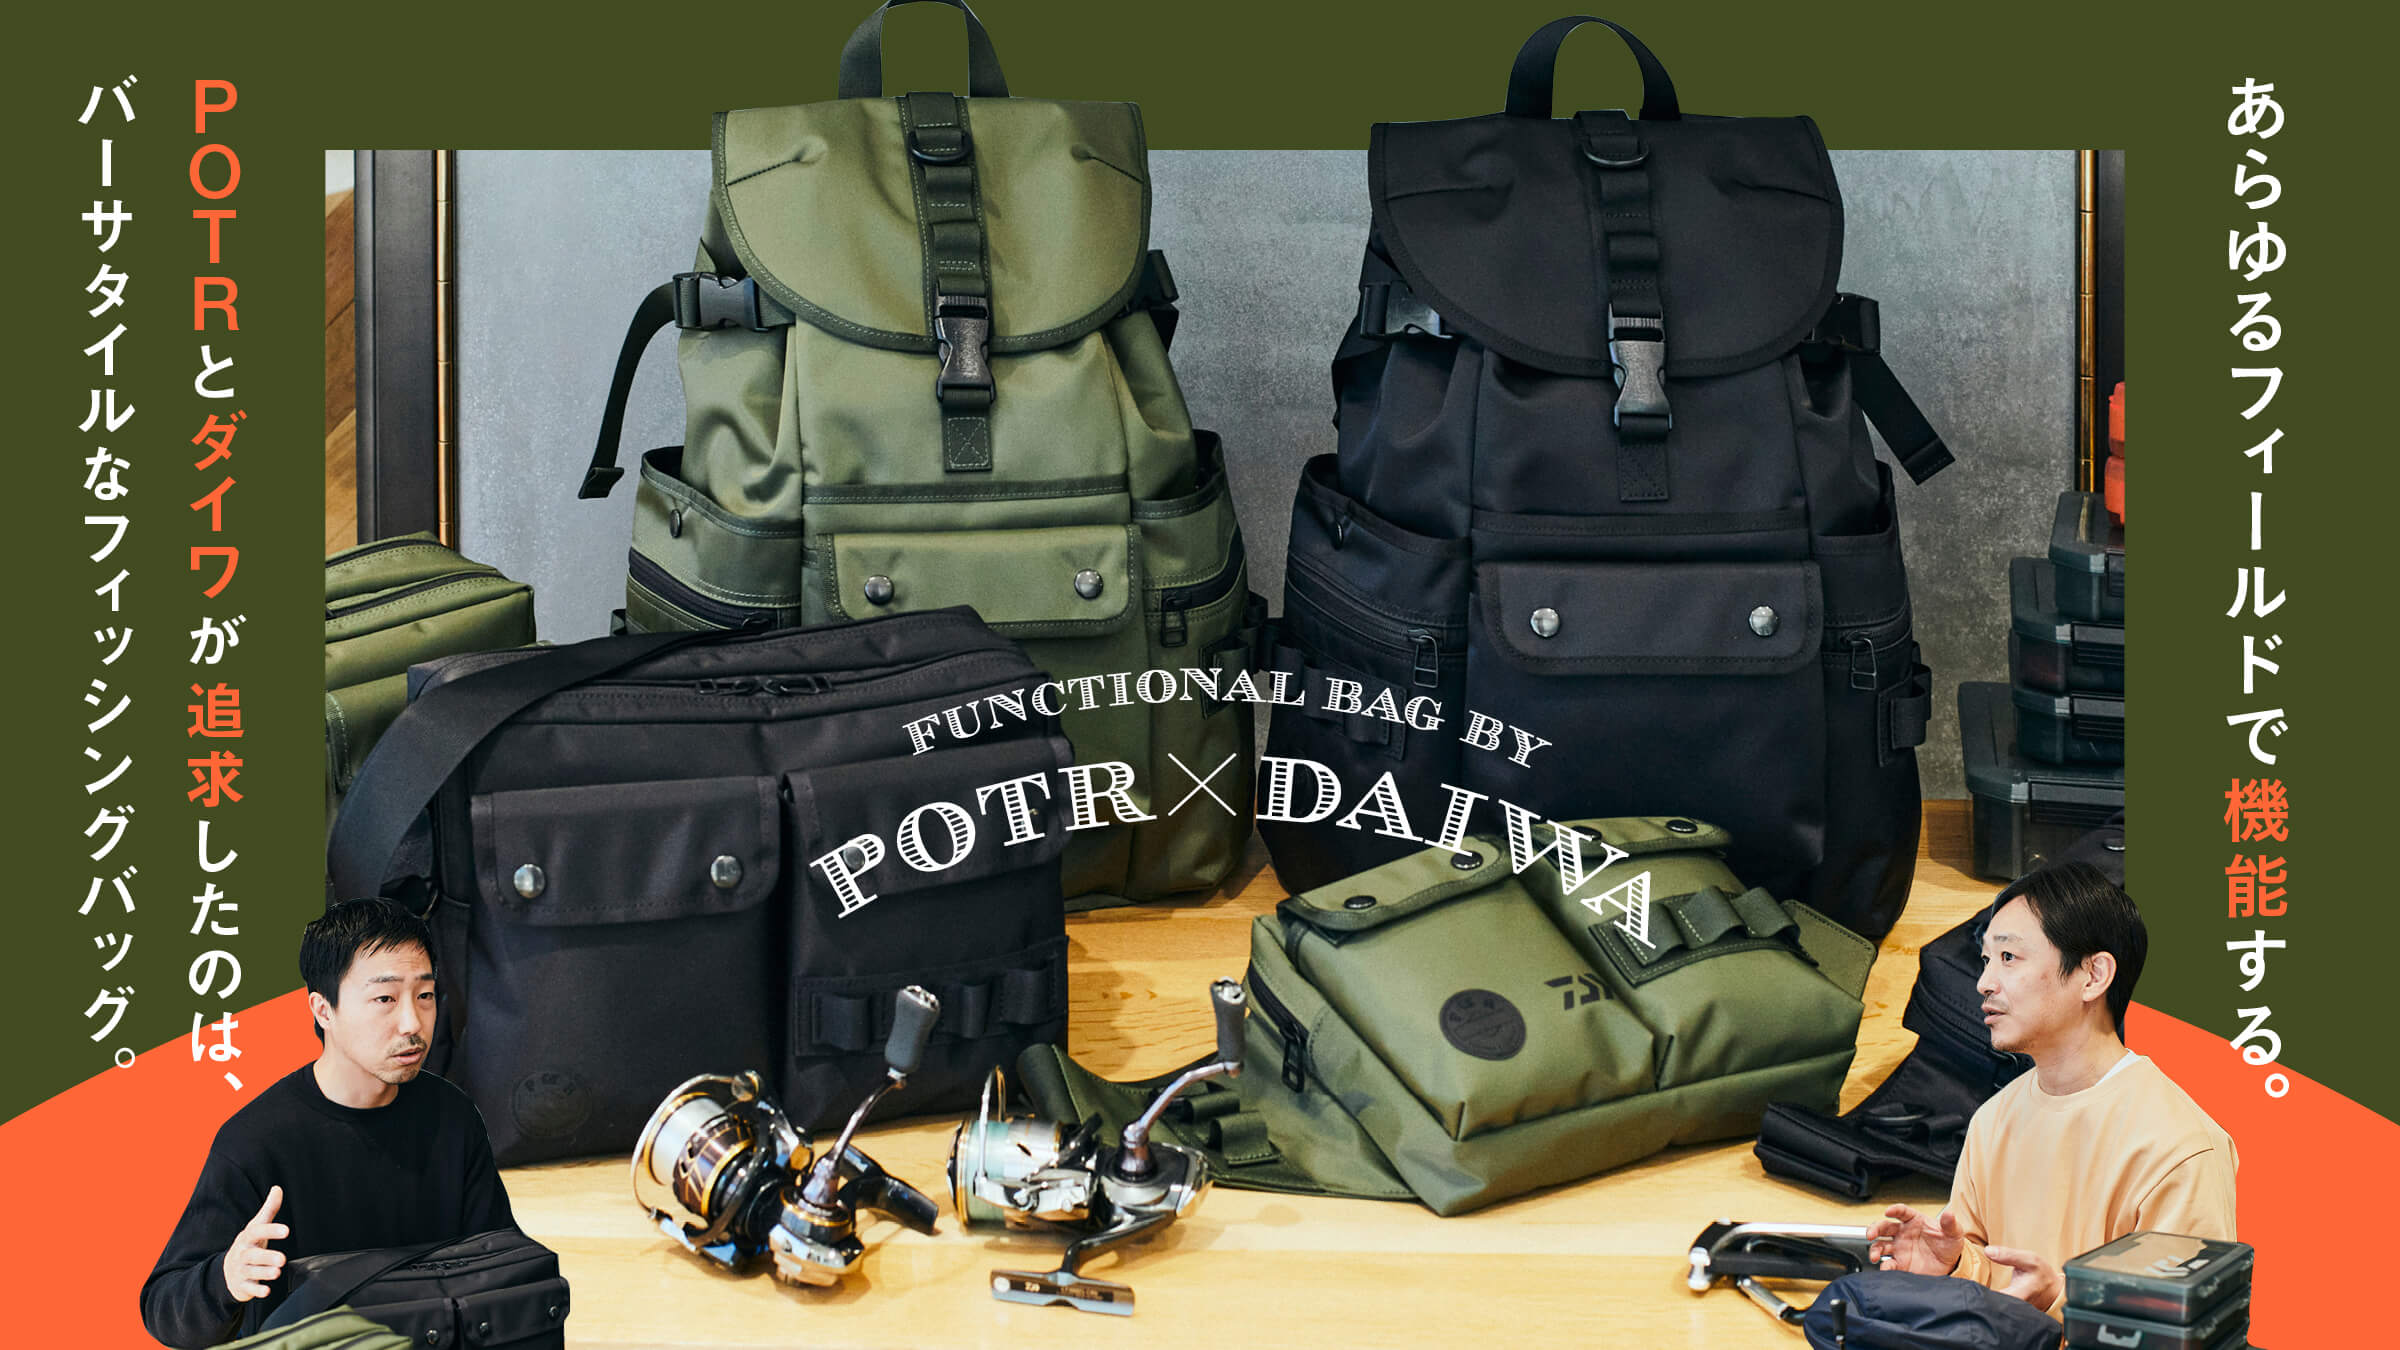 POTR and Daiwa pursued a versatile fishing bag that works in any field.